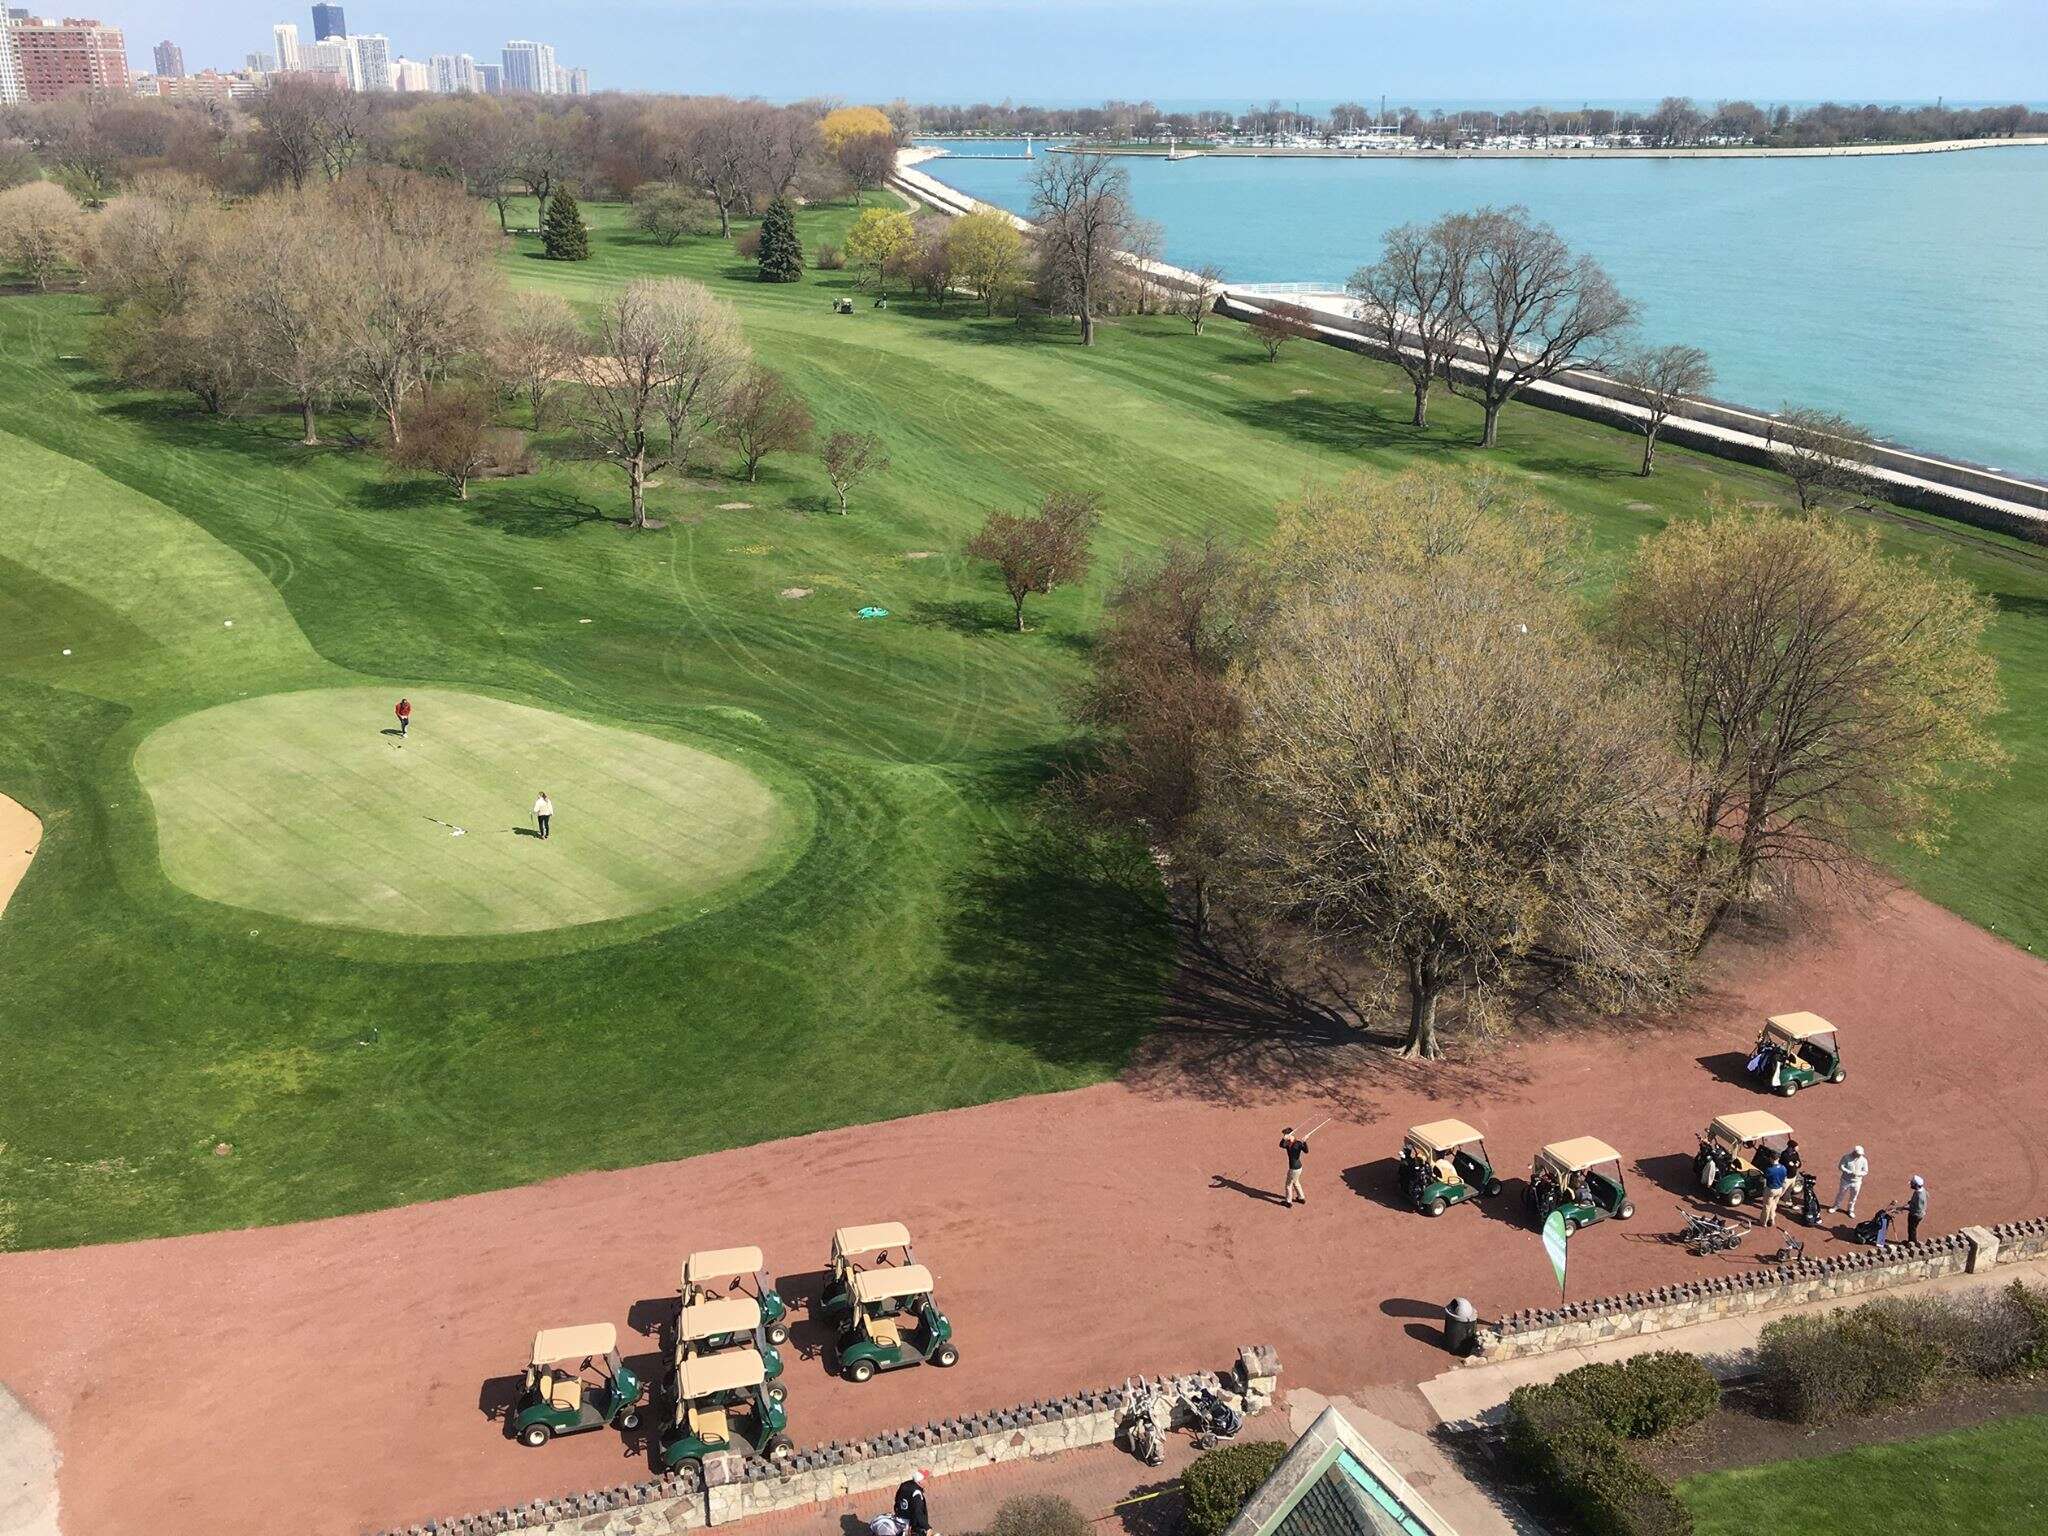 Golf Course in Chicago 